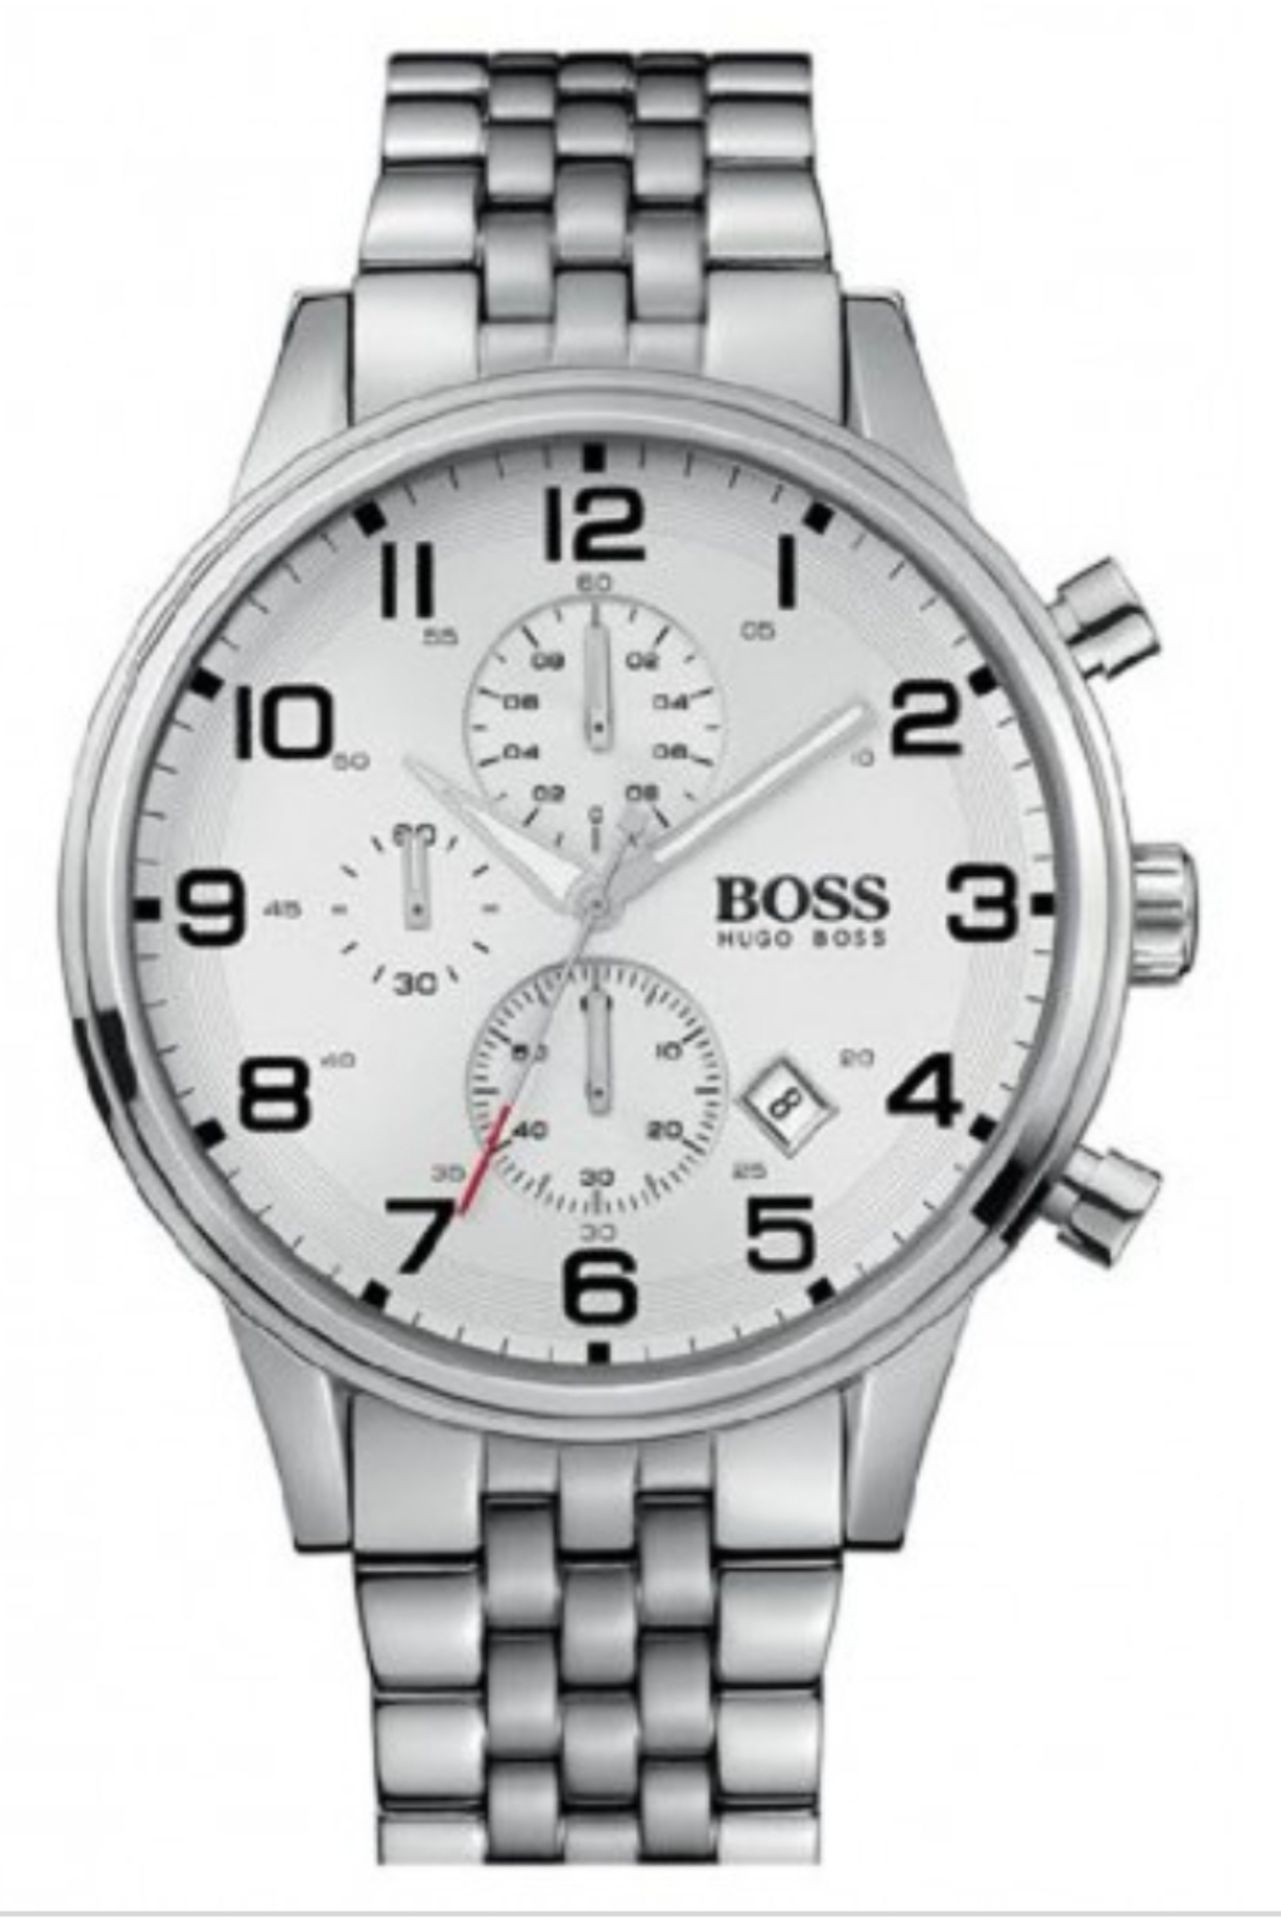 Hugo Boss Trade Lot 1C. A Total Of 20 Brand New Hugo Boss Watches - Image 20 of 20